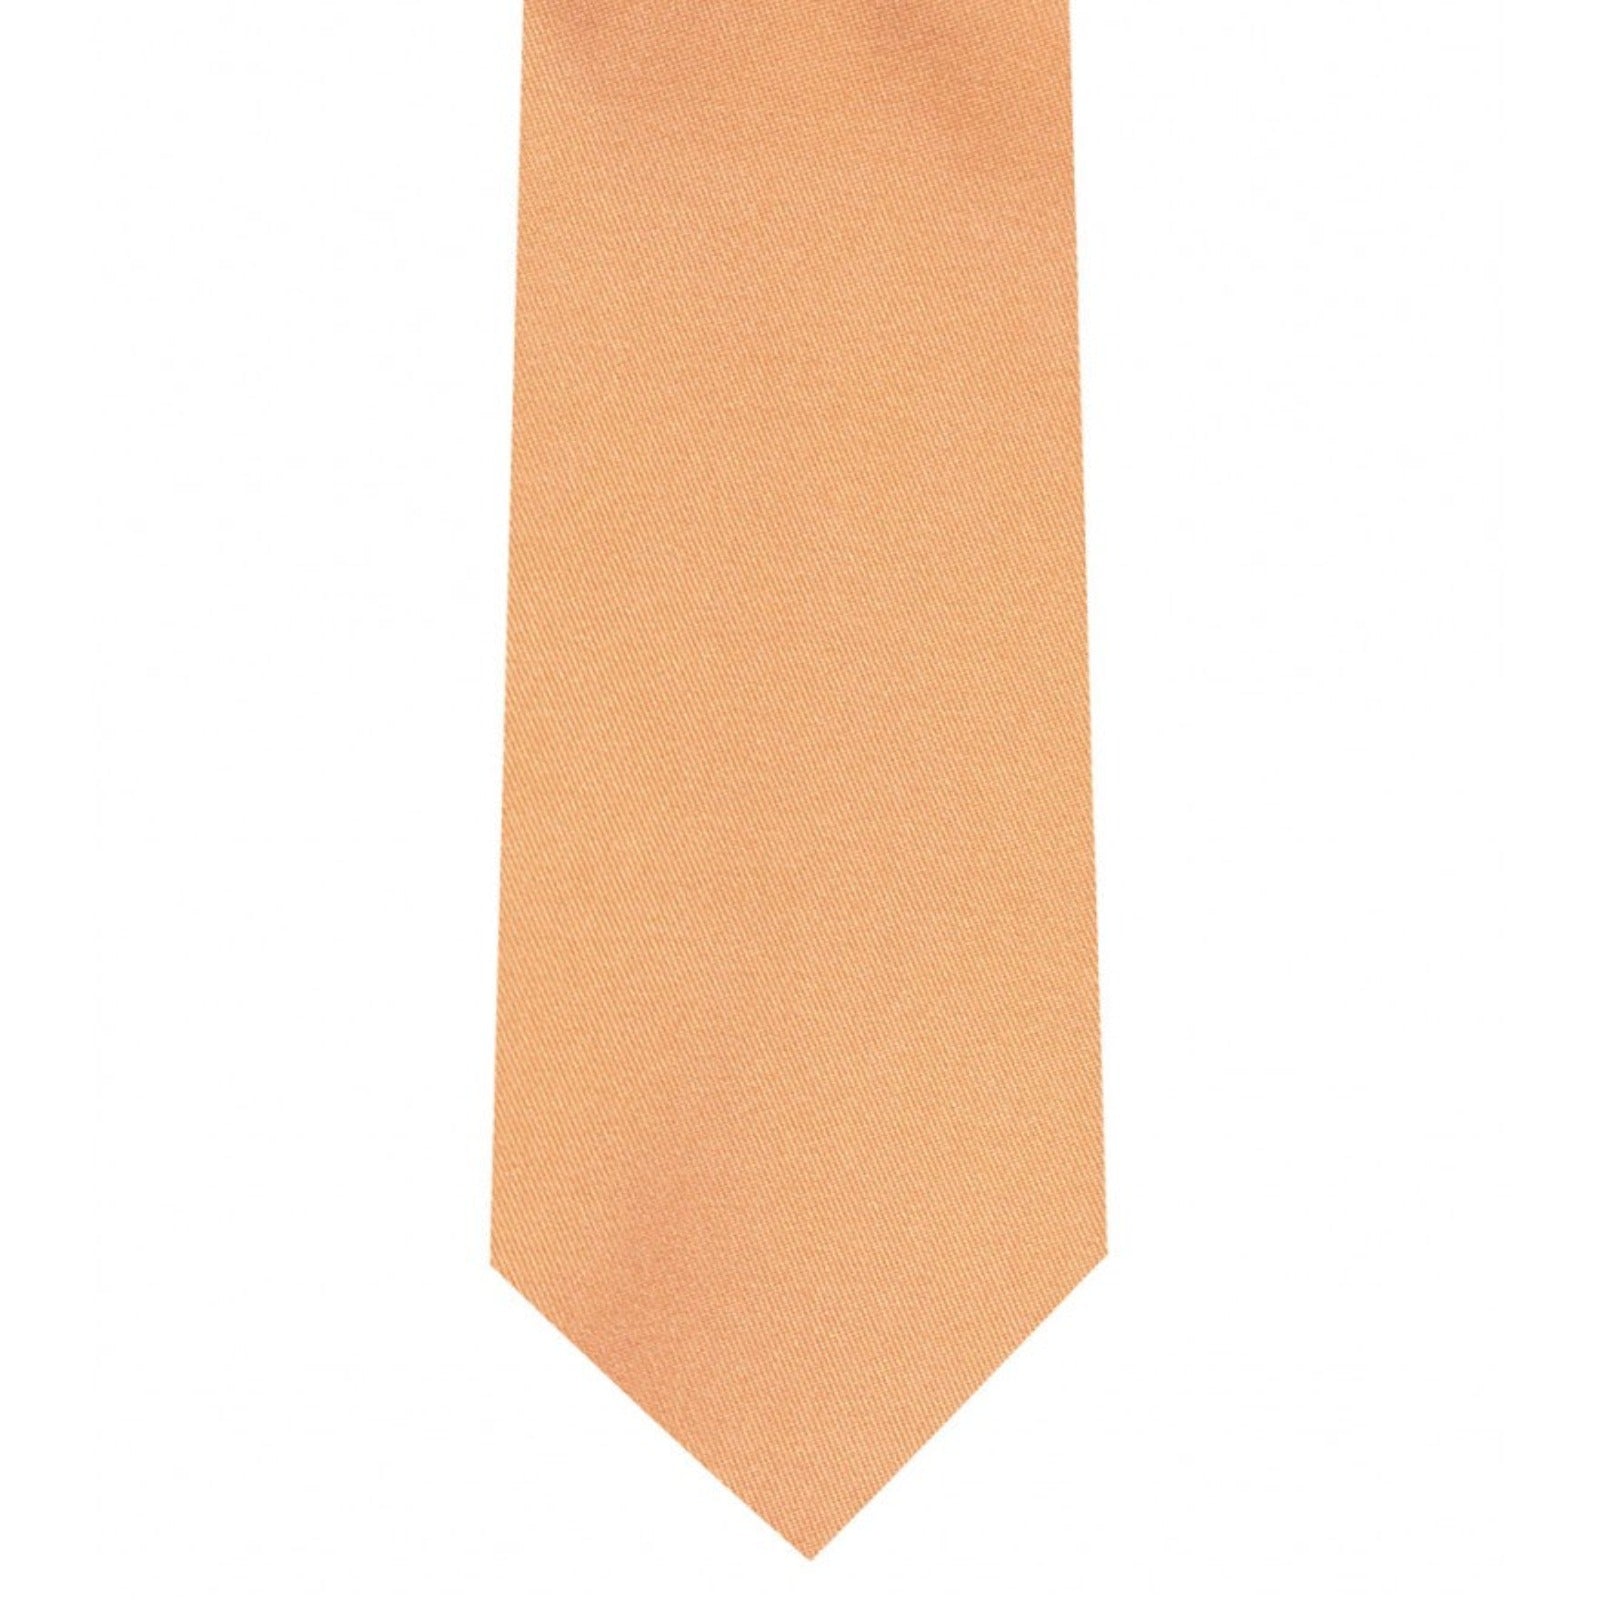 Classic Peach Tie Ultra Skinny tie width 2.25 inches With Matching Pocket Square | KCT Menswear